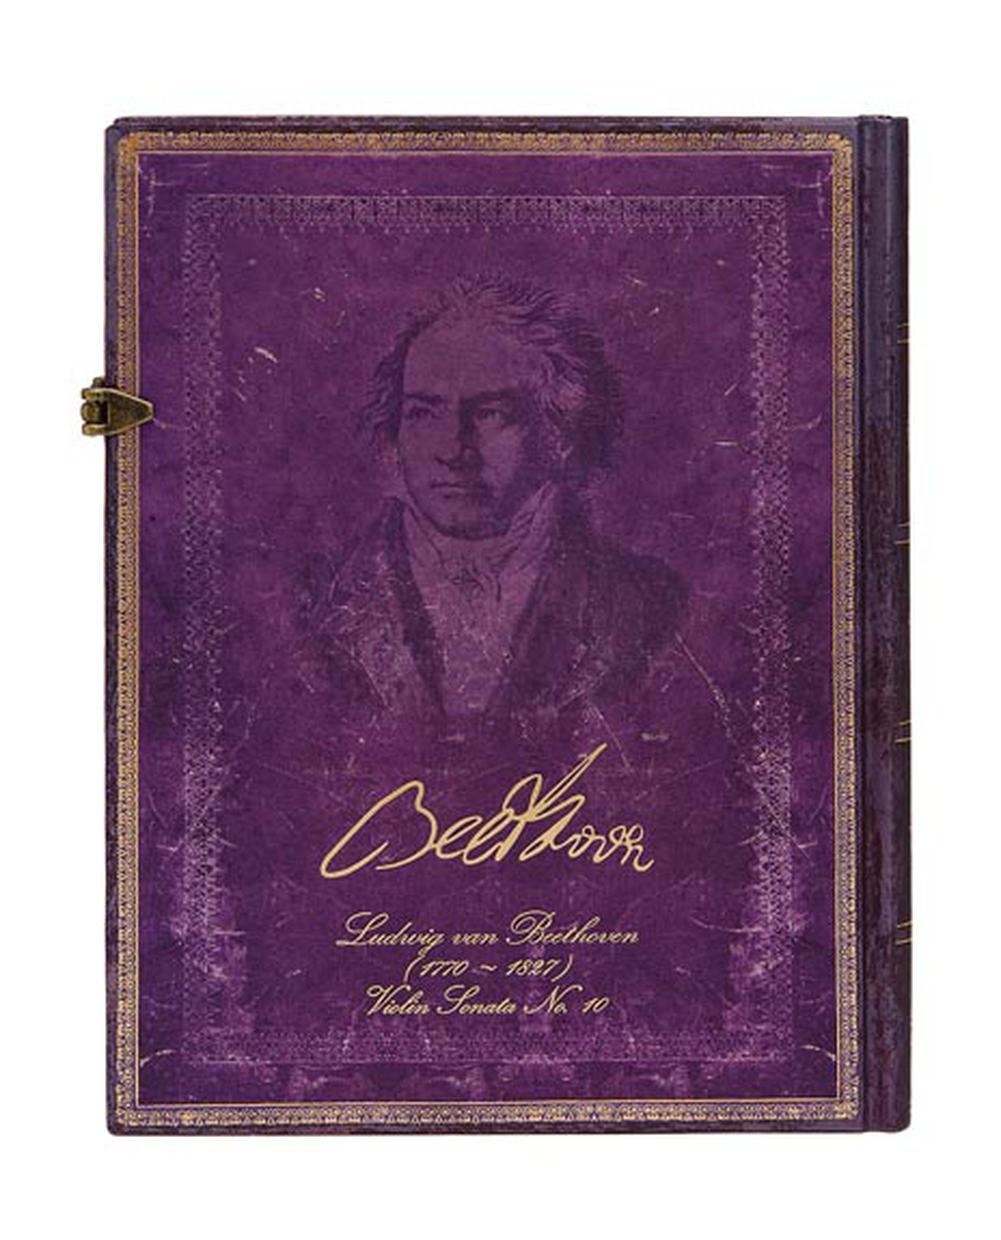 Beethoven's 250th Birthday Special Editions